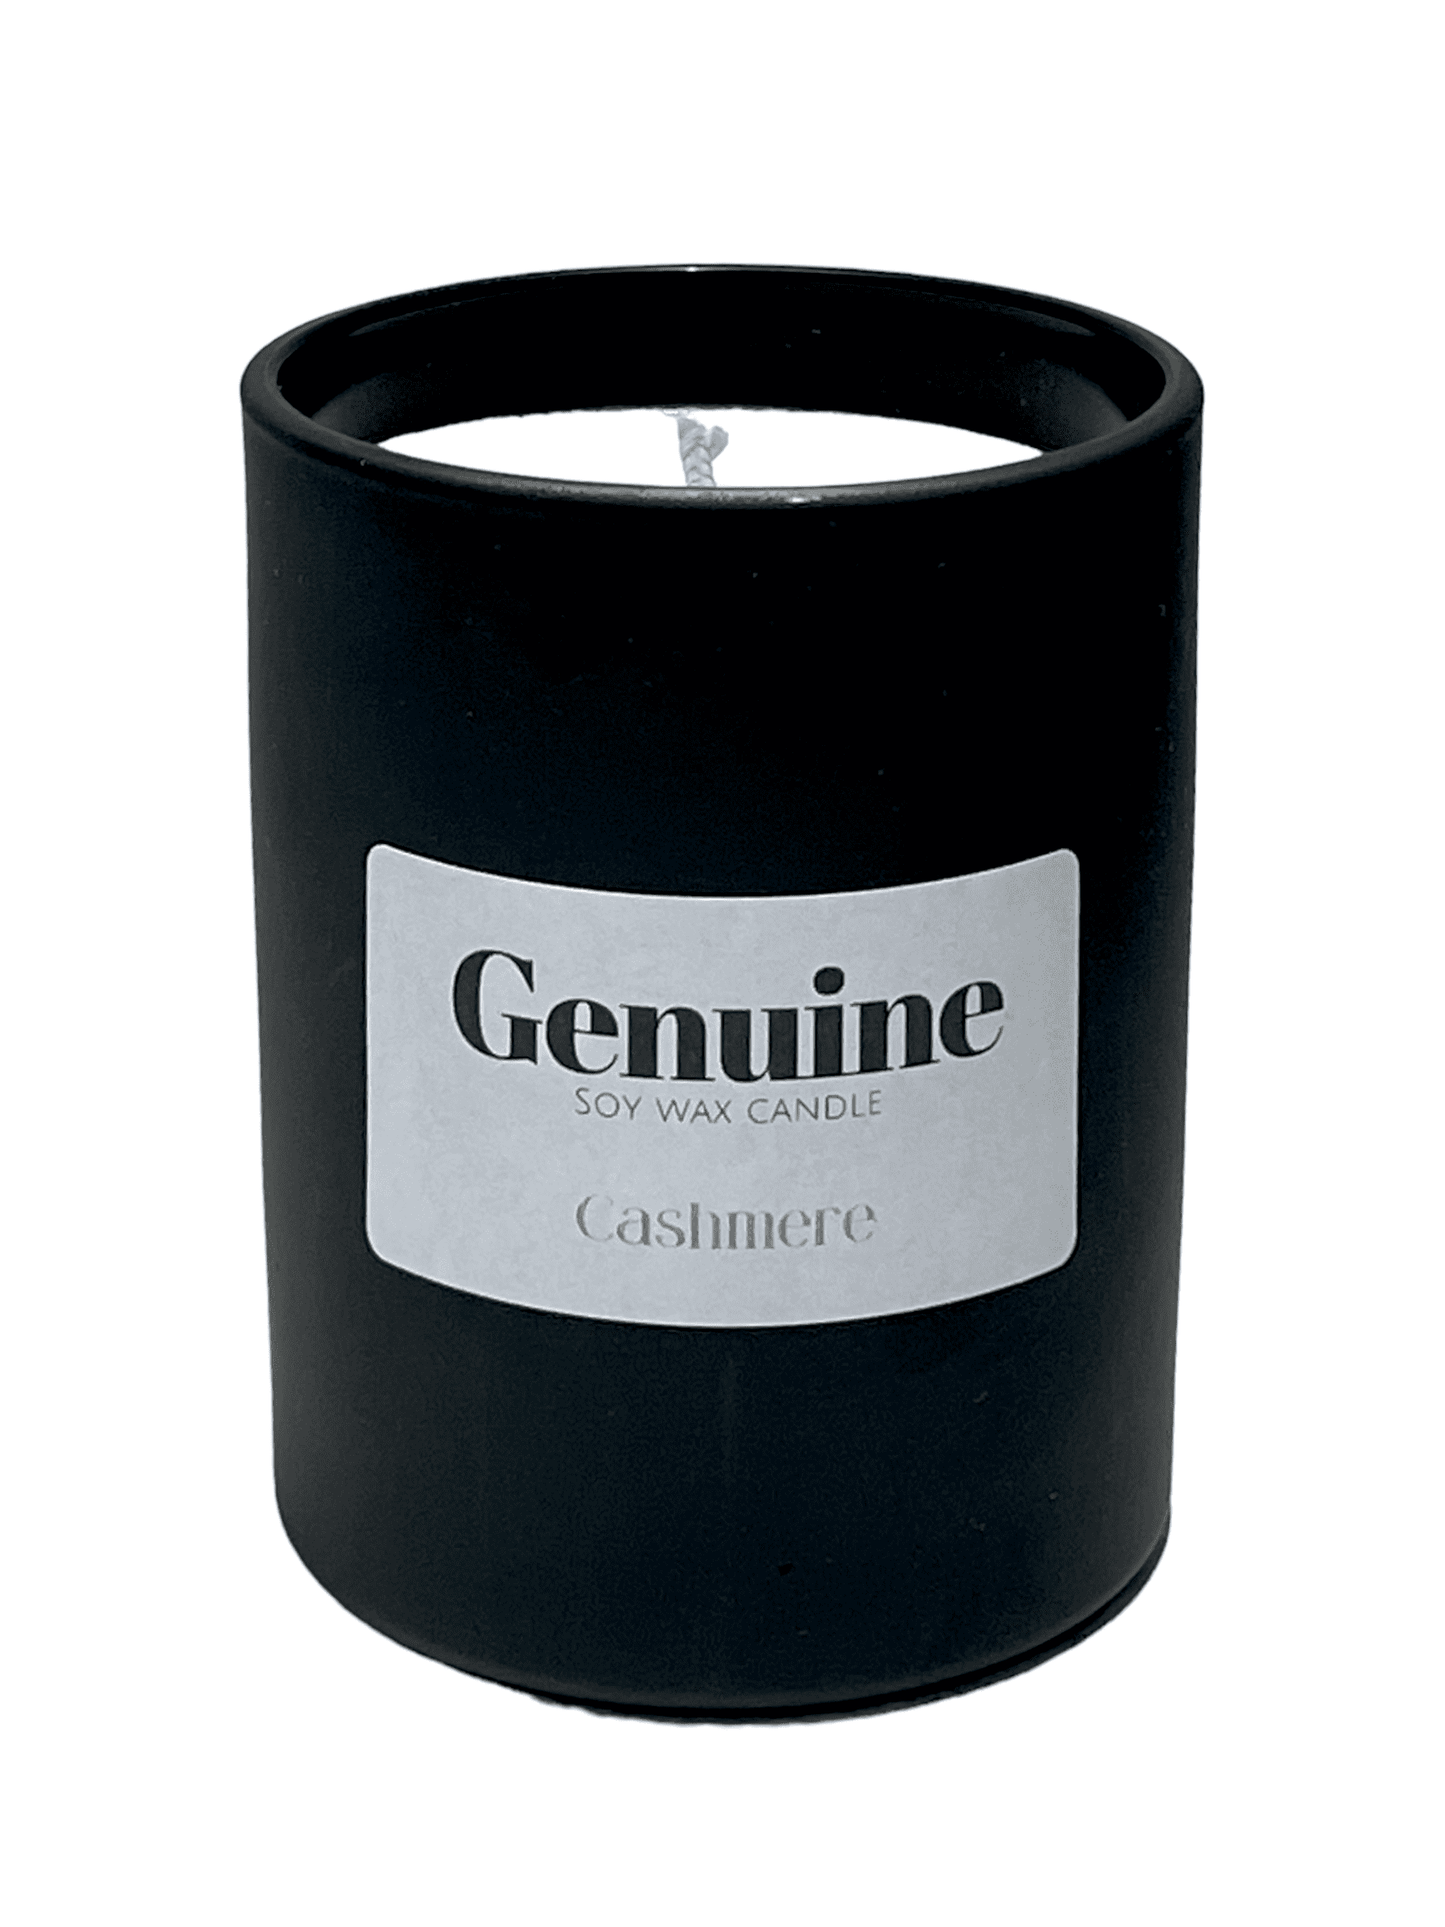 Genuine Design Soy Wax Candle - Cashmere - Hand Poured in Calgary, Alberta, Canada. Genuine Design Luxury Consignment.